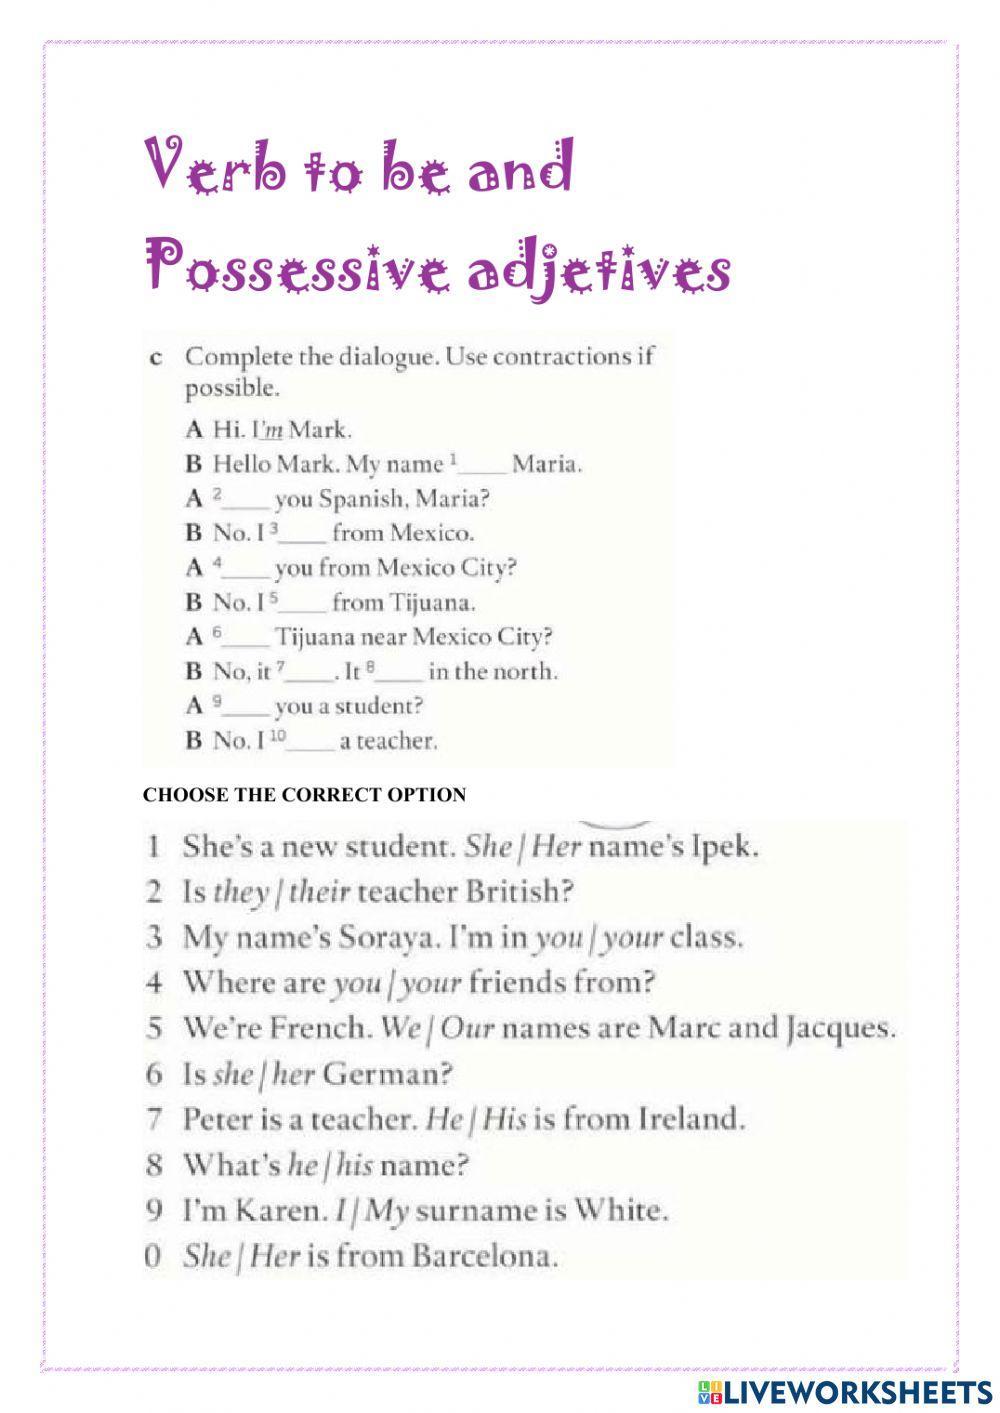 Verb to be and possesive adjetives